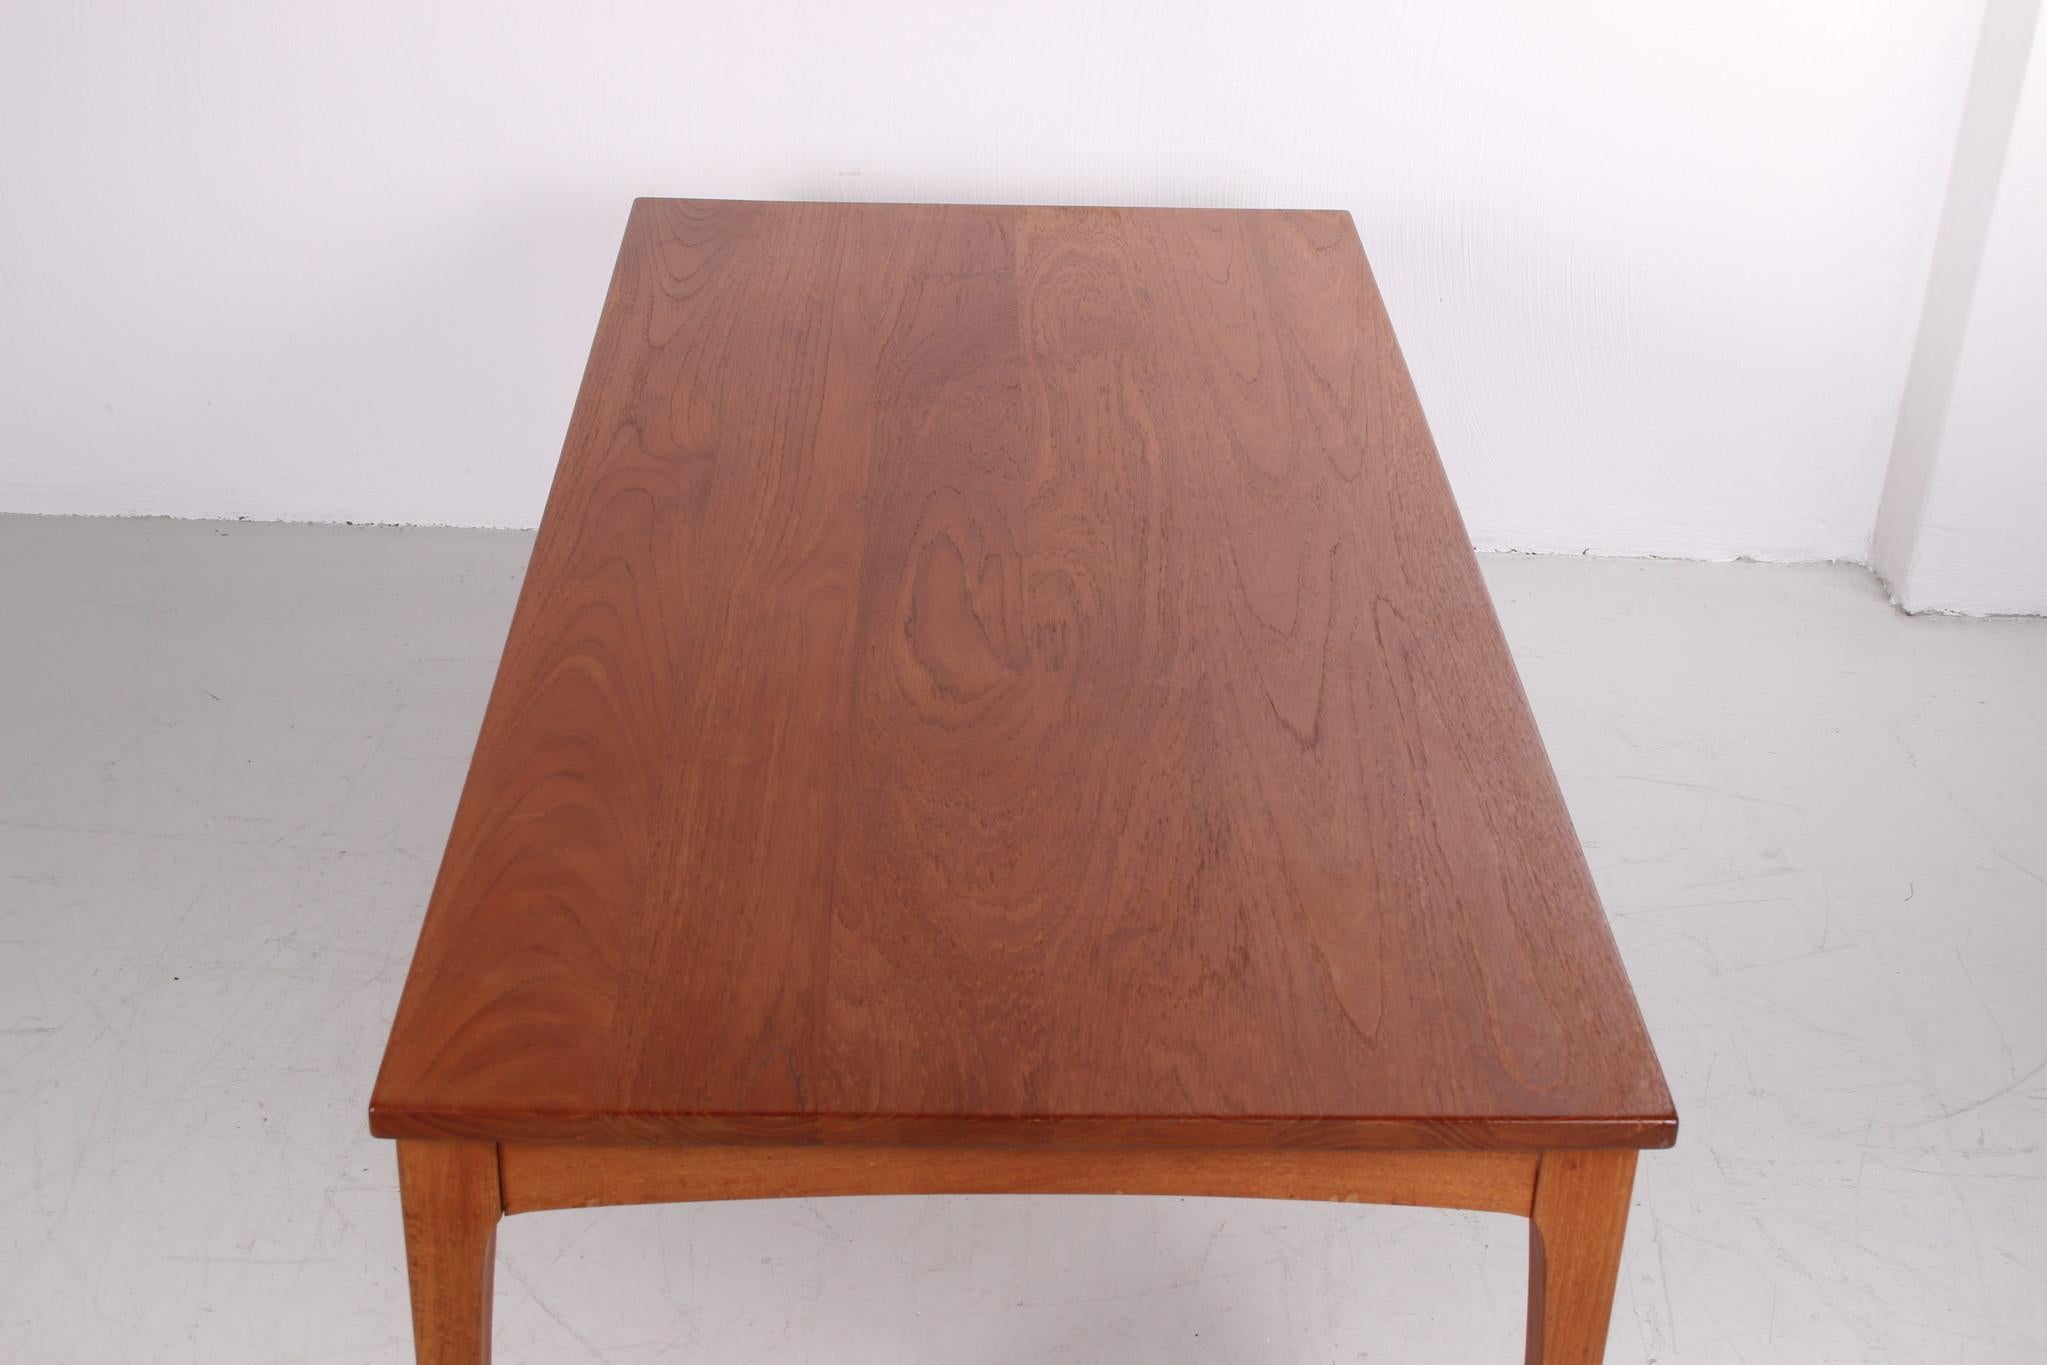 20th Century Danish Design Coffee Table from solid Teak design by Niels Bach 1960 For Sale